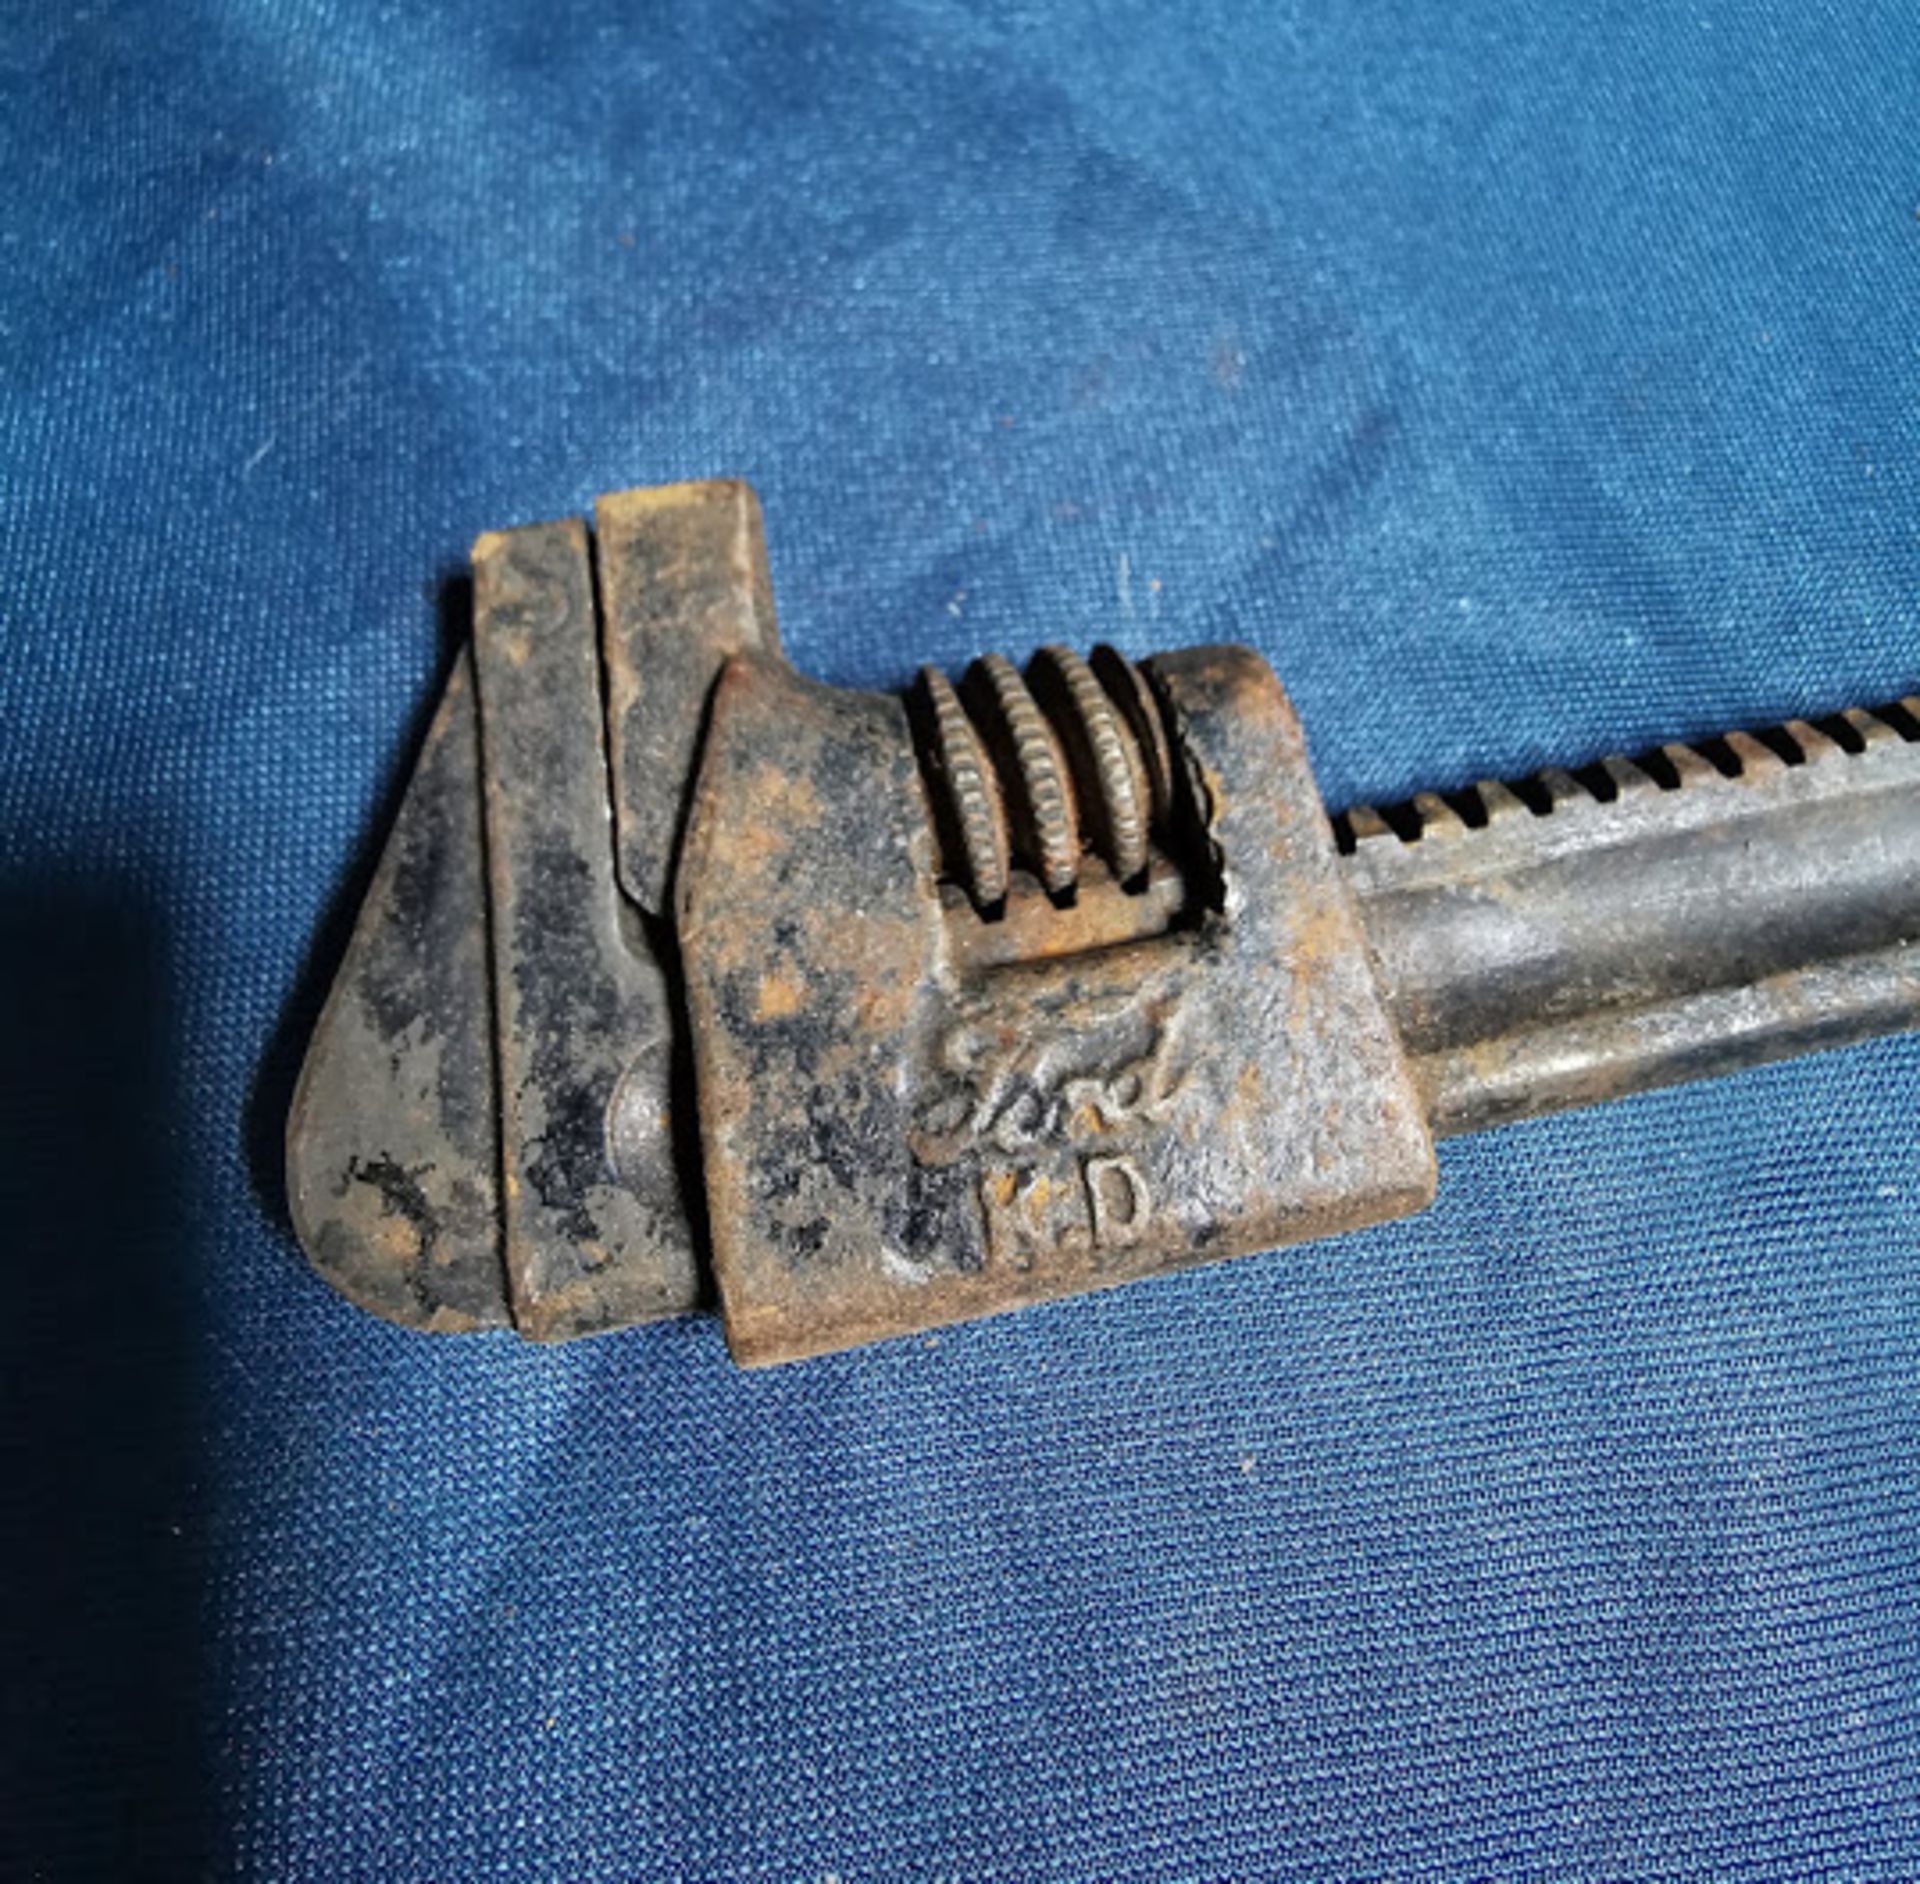 Ford Adjustable Wrench - Image 2 of 2